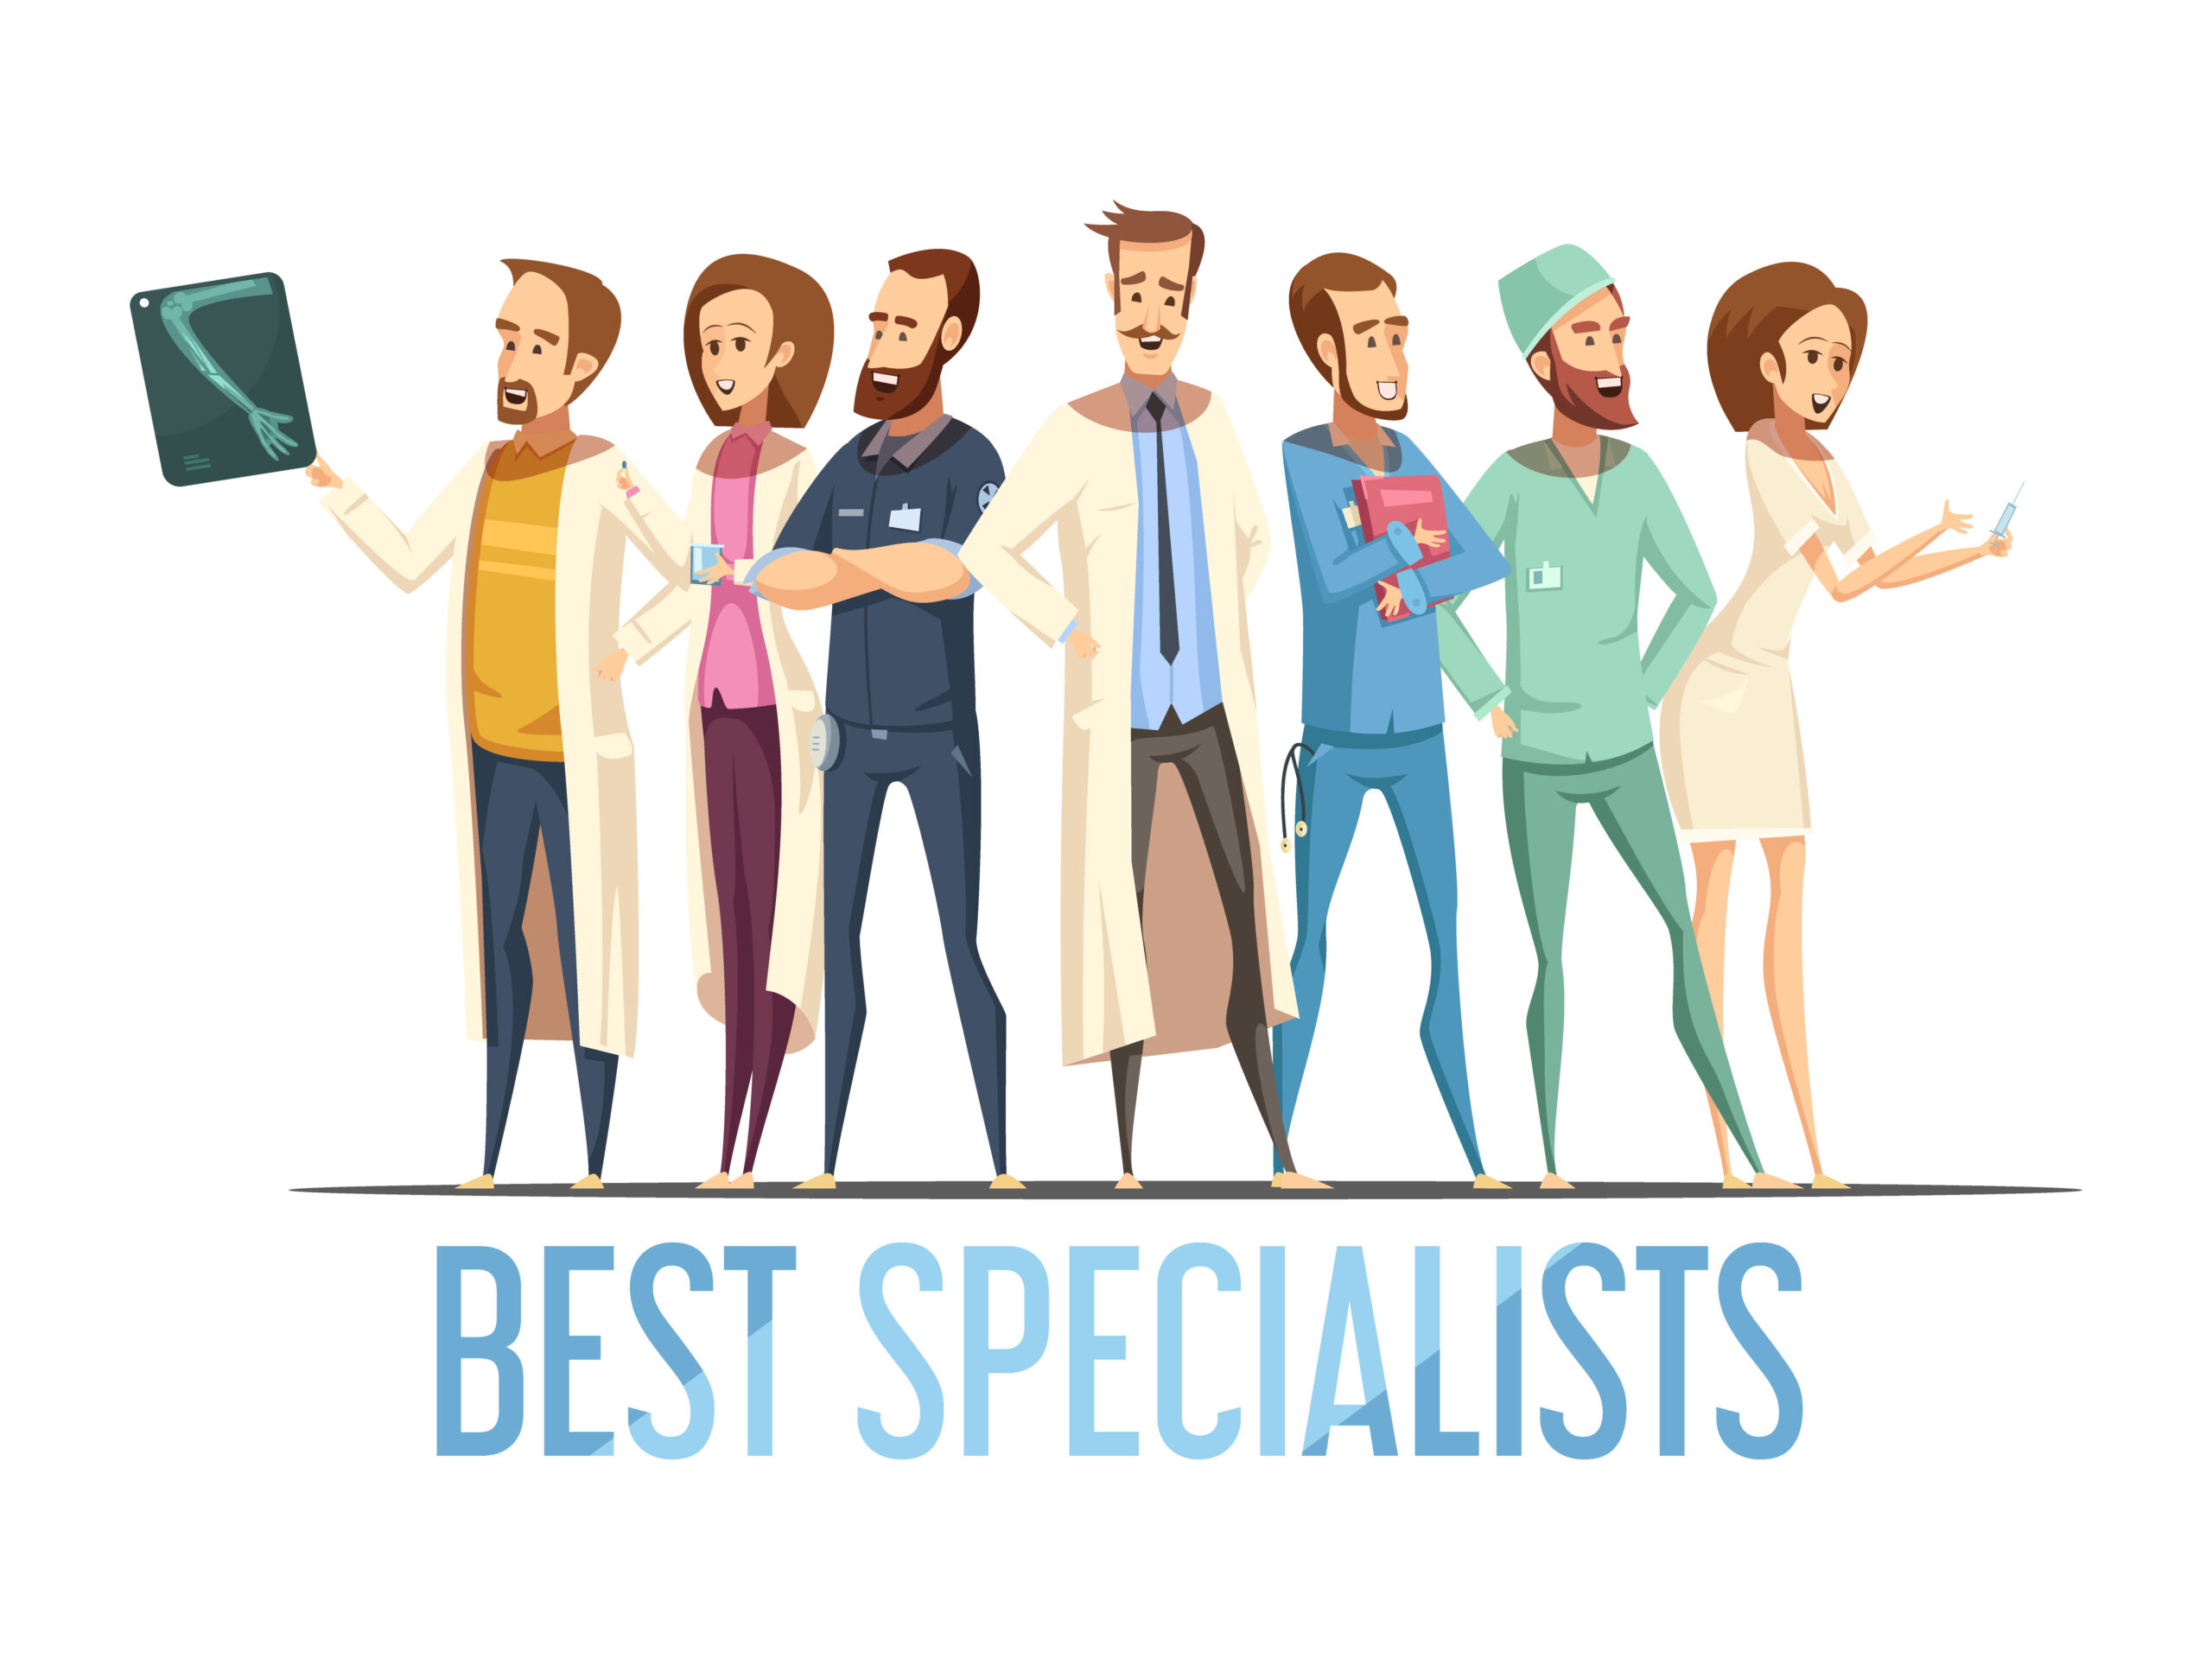 Best medical specialists design with smiling doctors and nurses in various poses cartoon retro style vector illustration